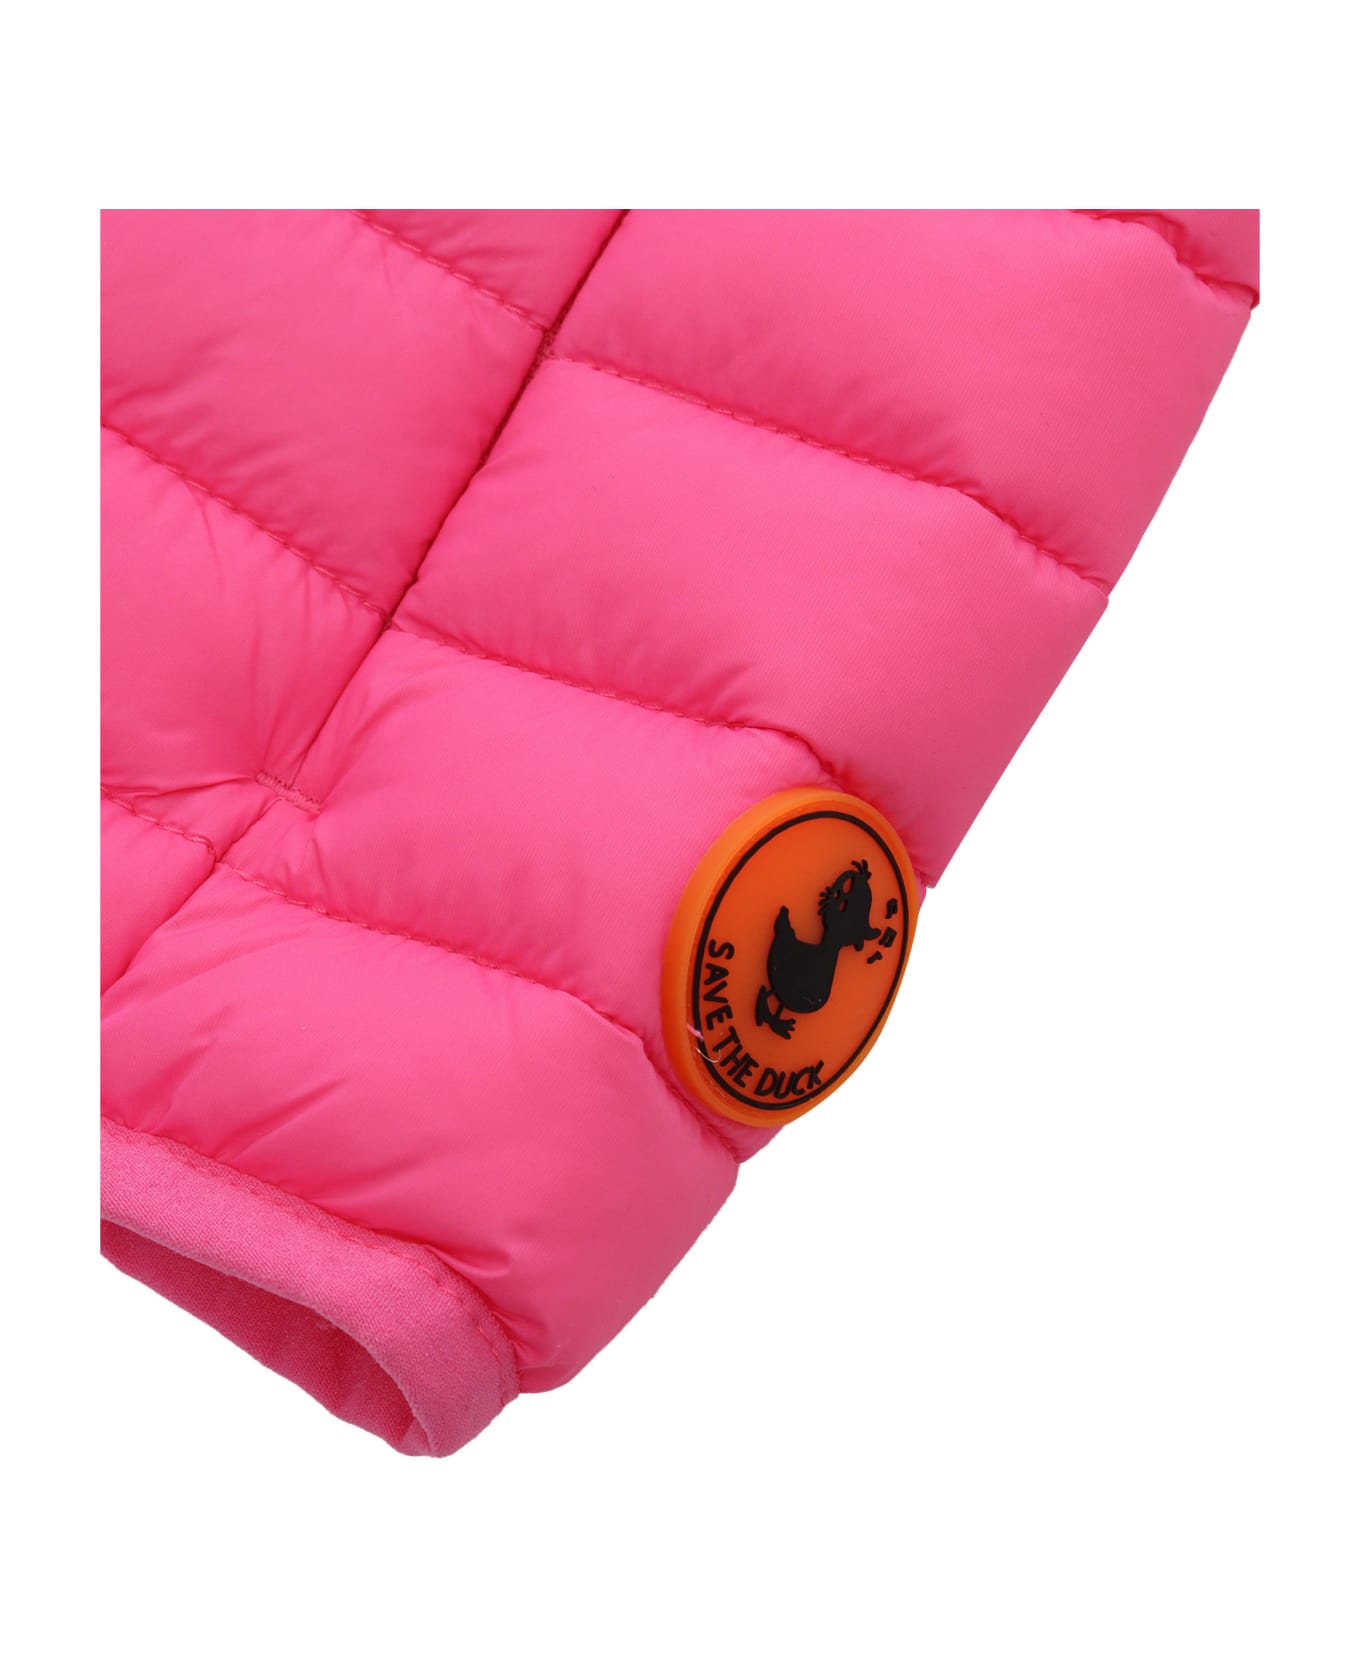 Save the Duck Padded Vest For Girls - PINK